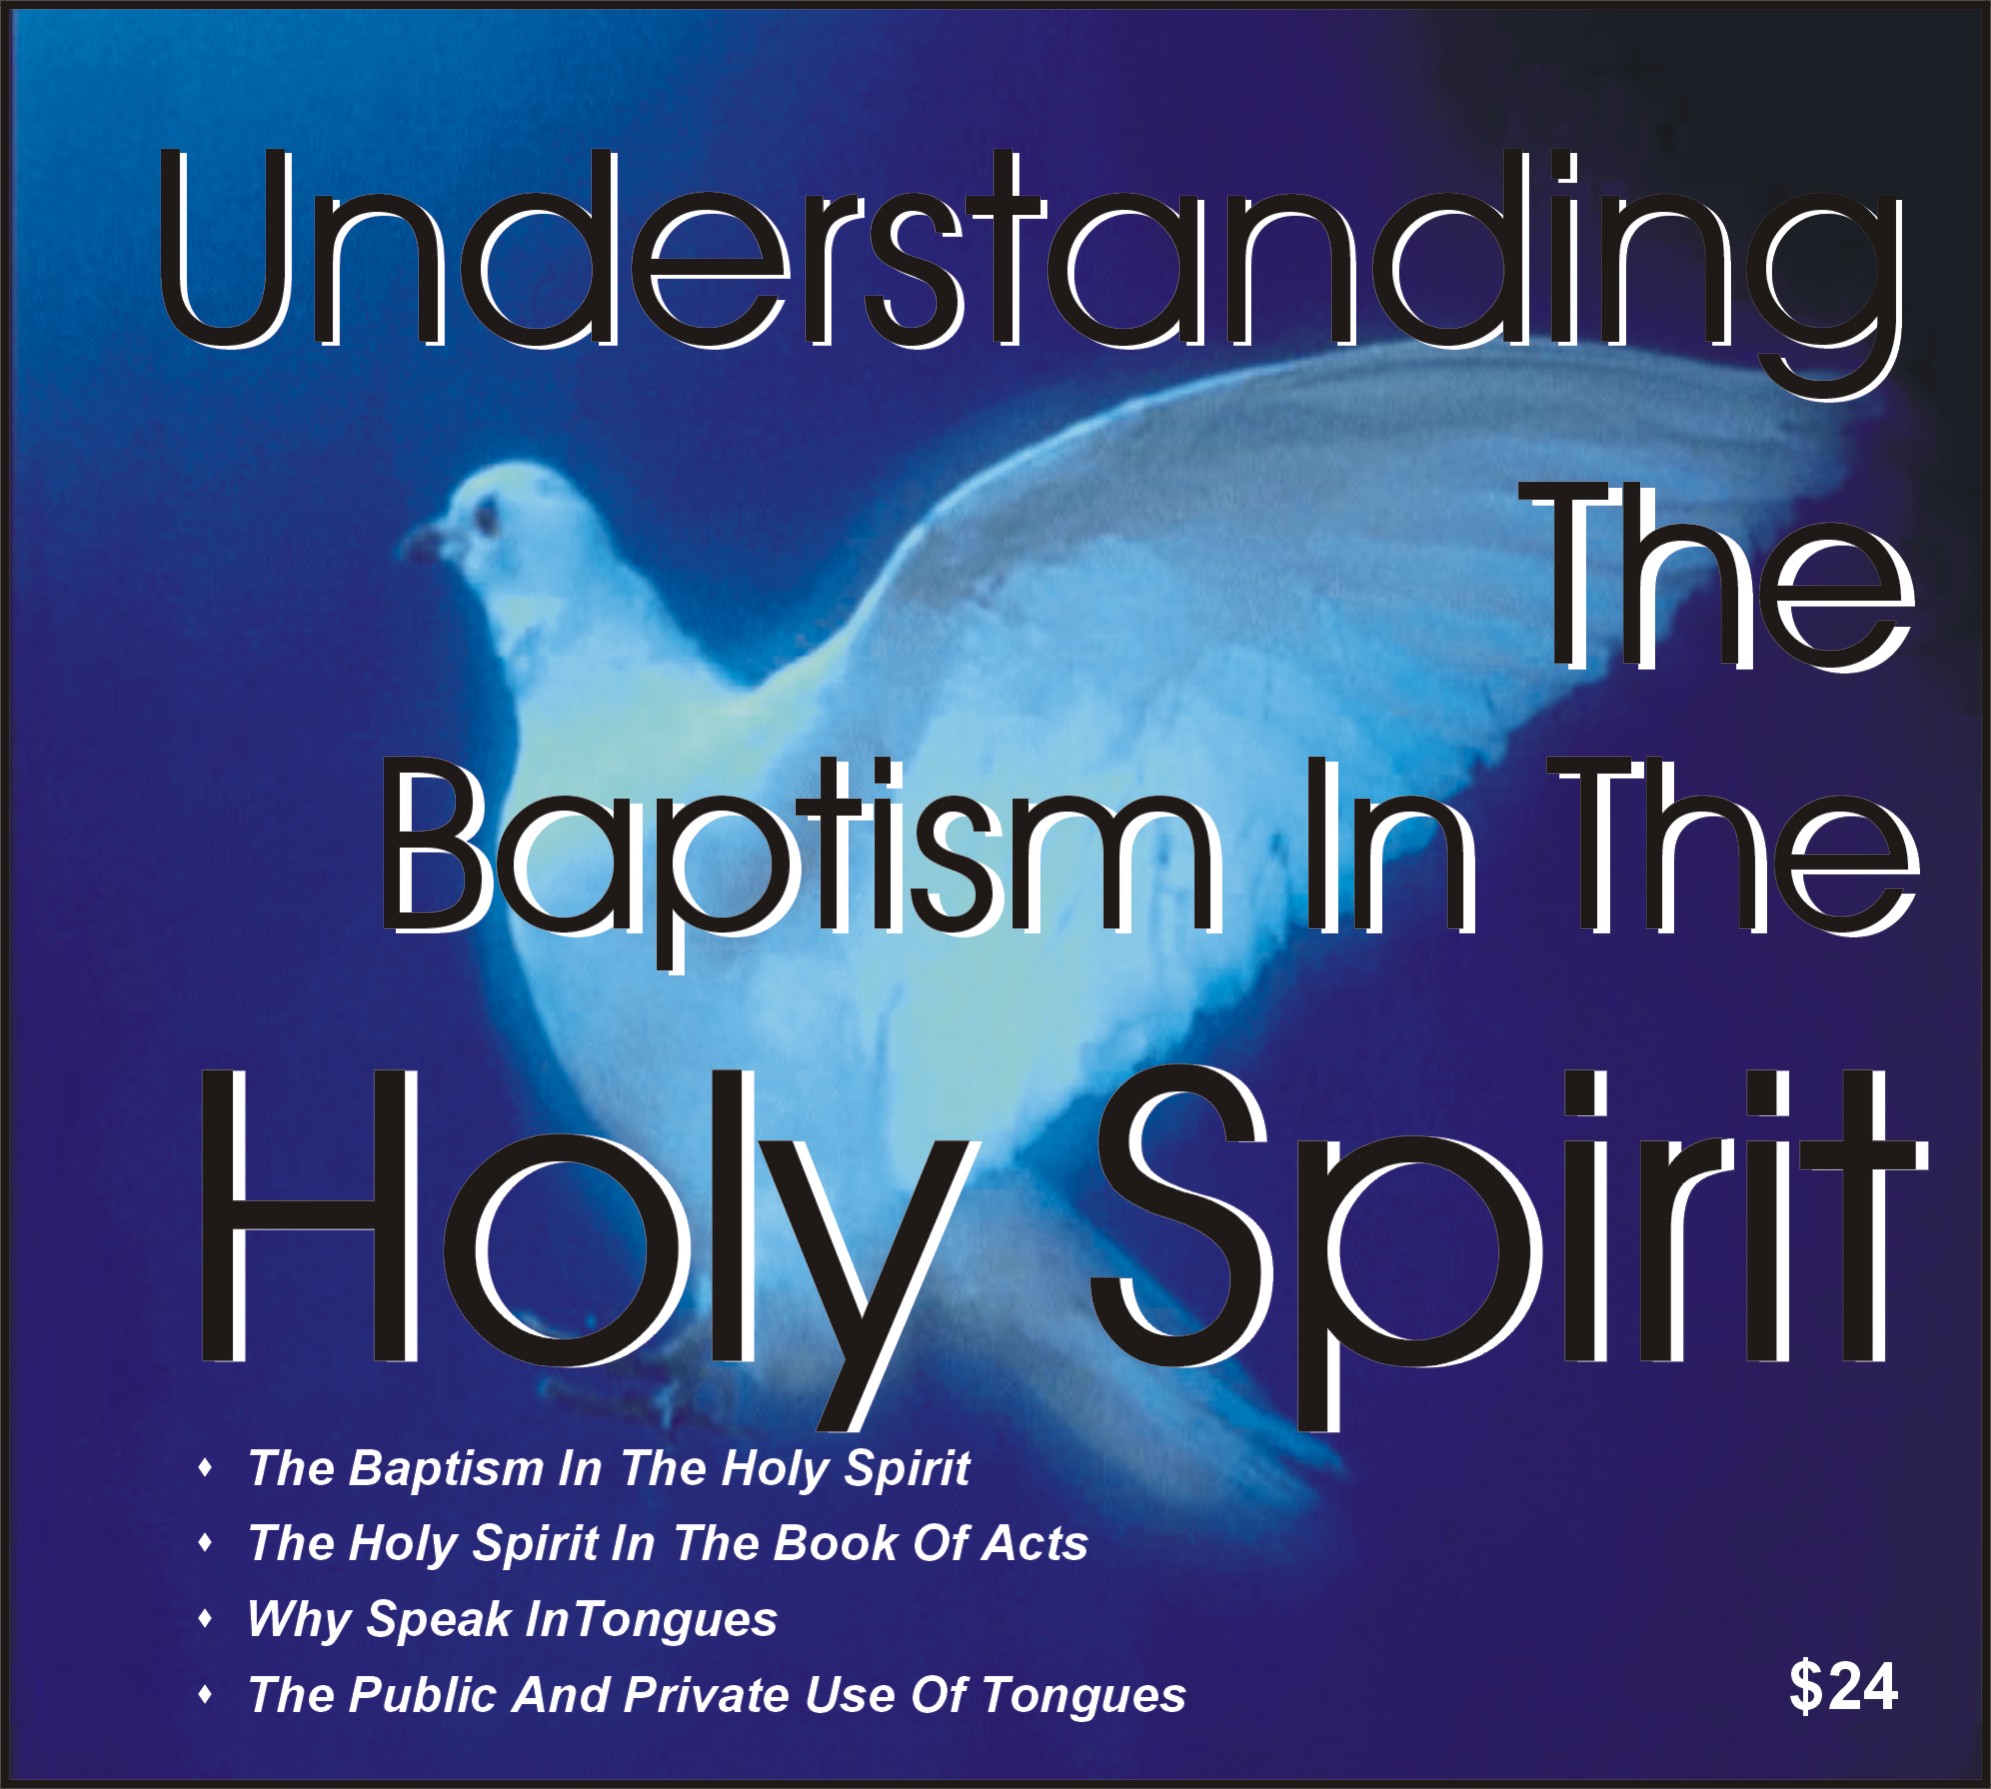 Research and reflection: the baptism of the holy spirit